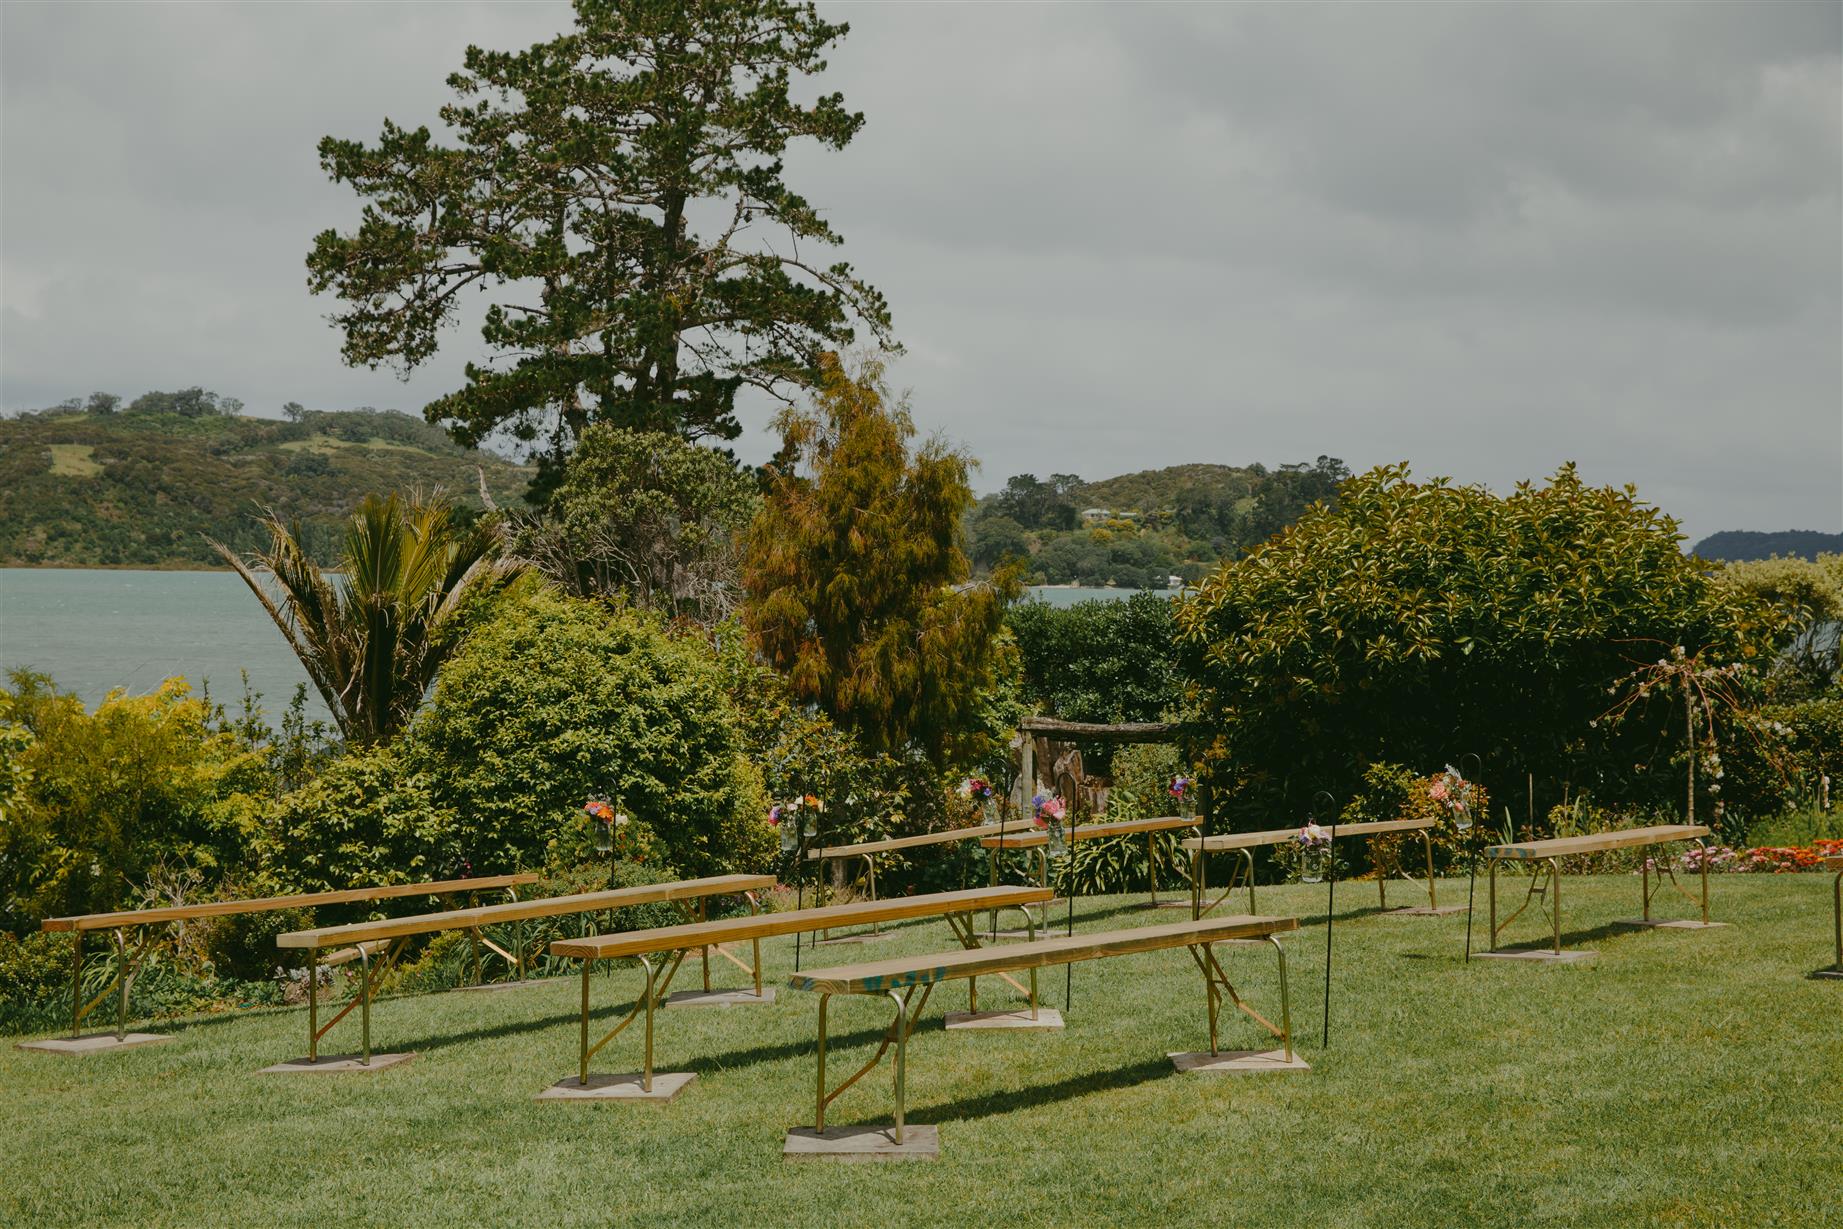 Wedding Ceremony With a View - An Elegant Spring Vintage Wedding